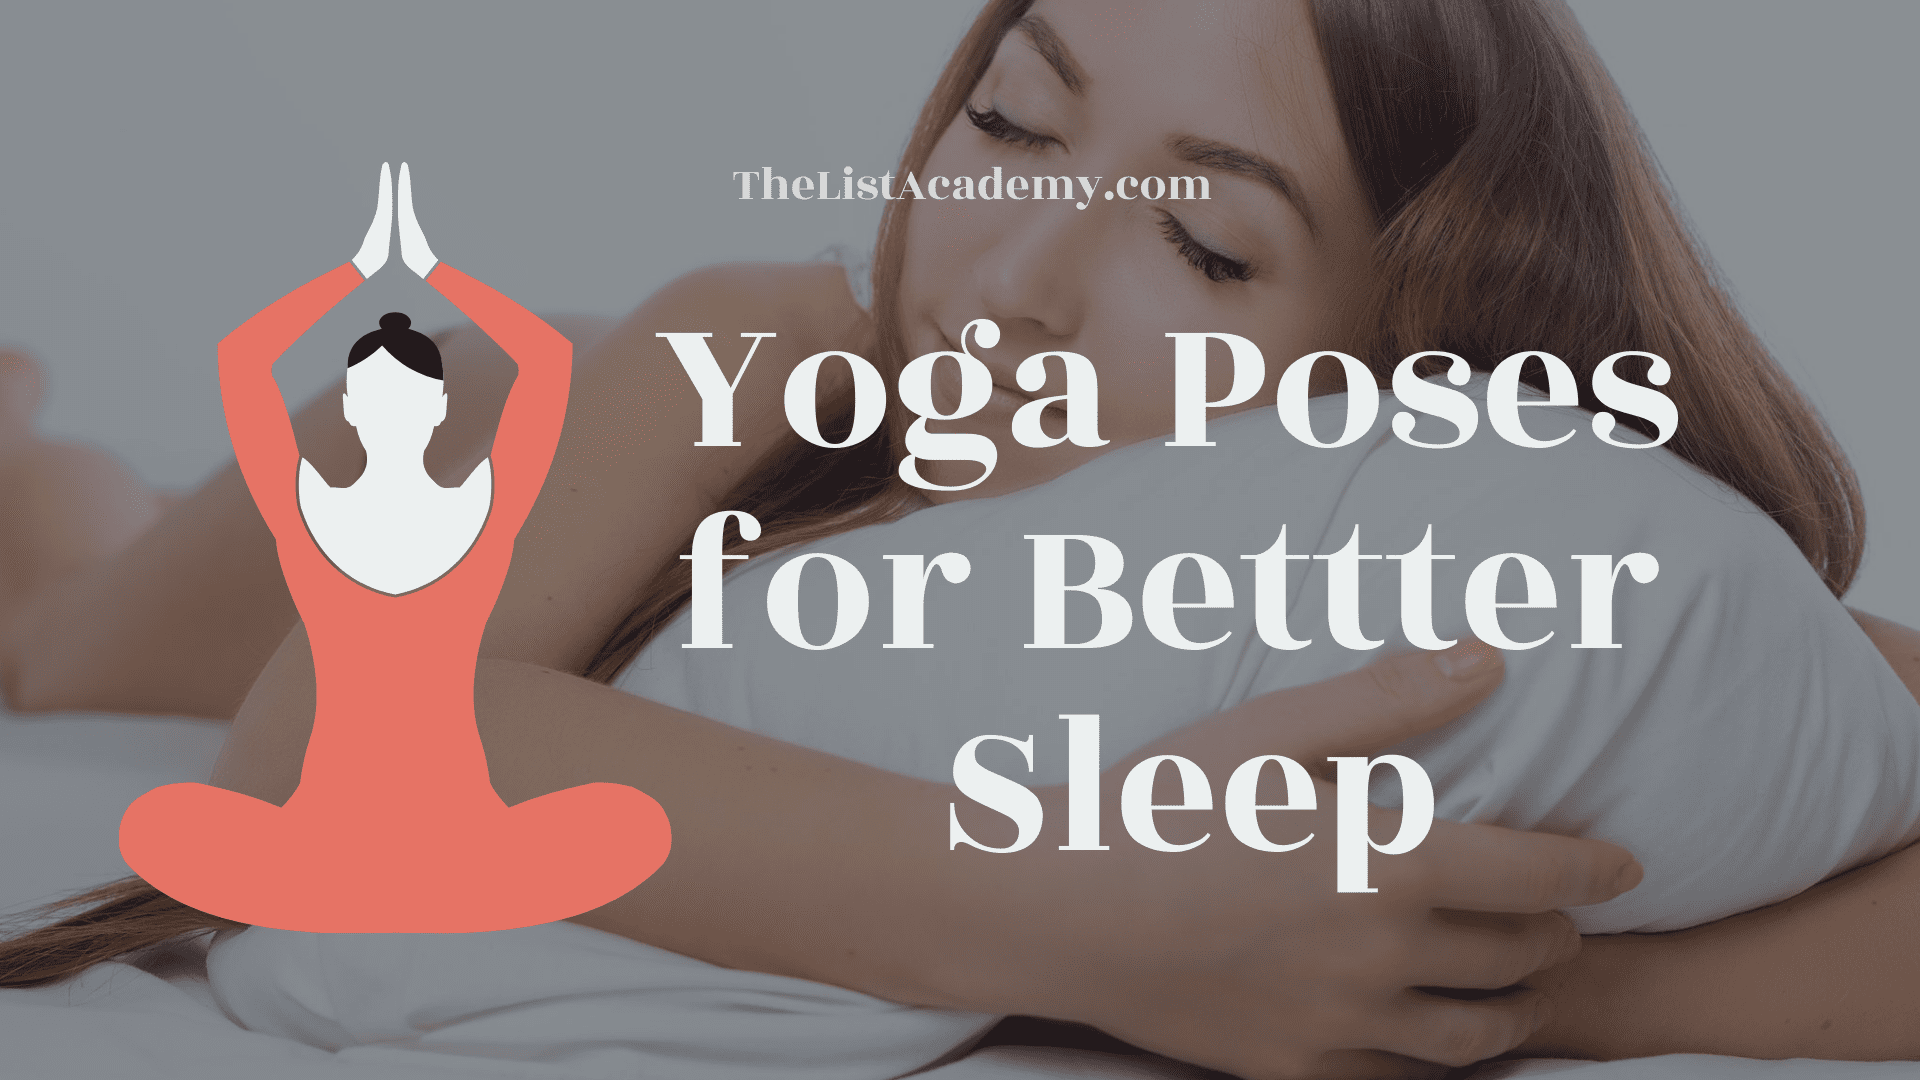 Cover Image For List : 13 Yoga Poses For Better Sleep